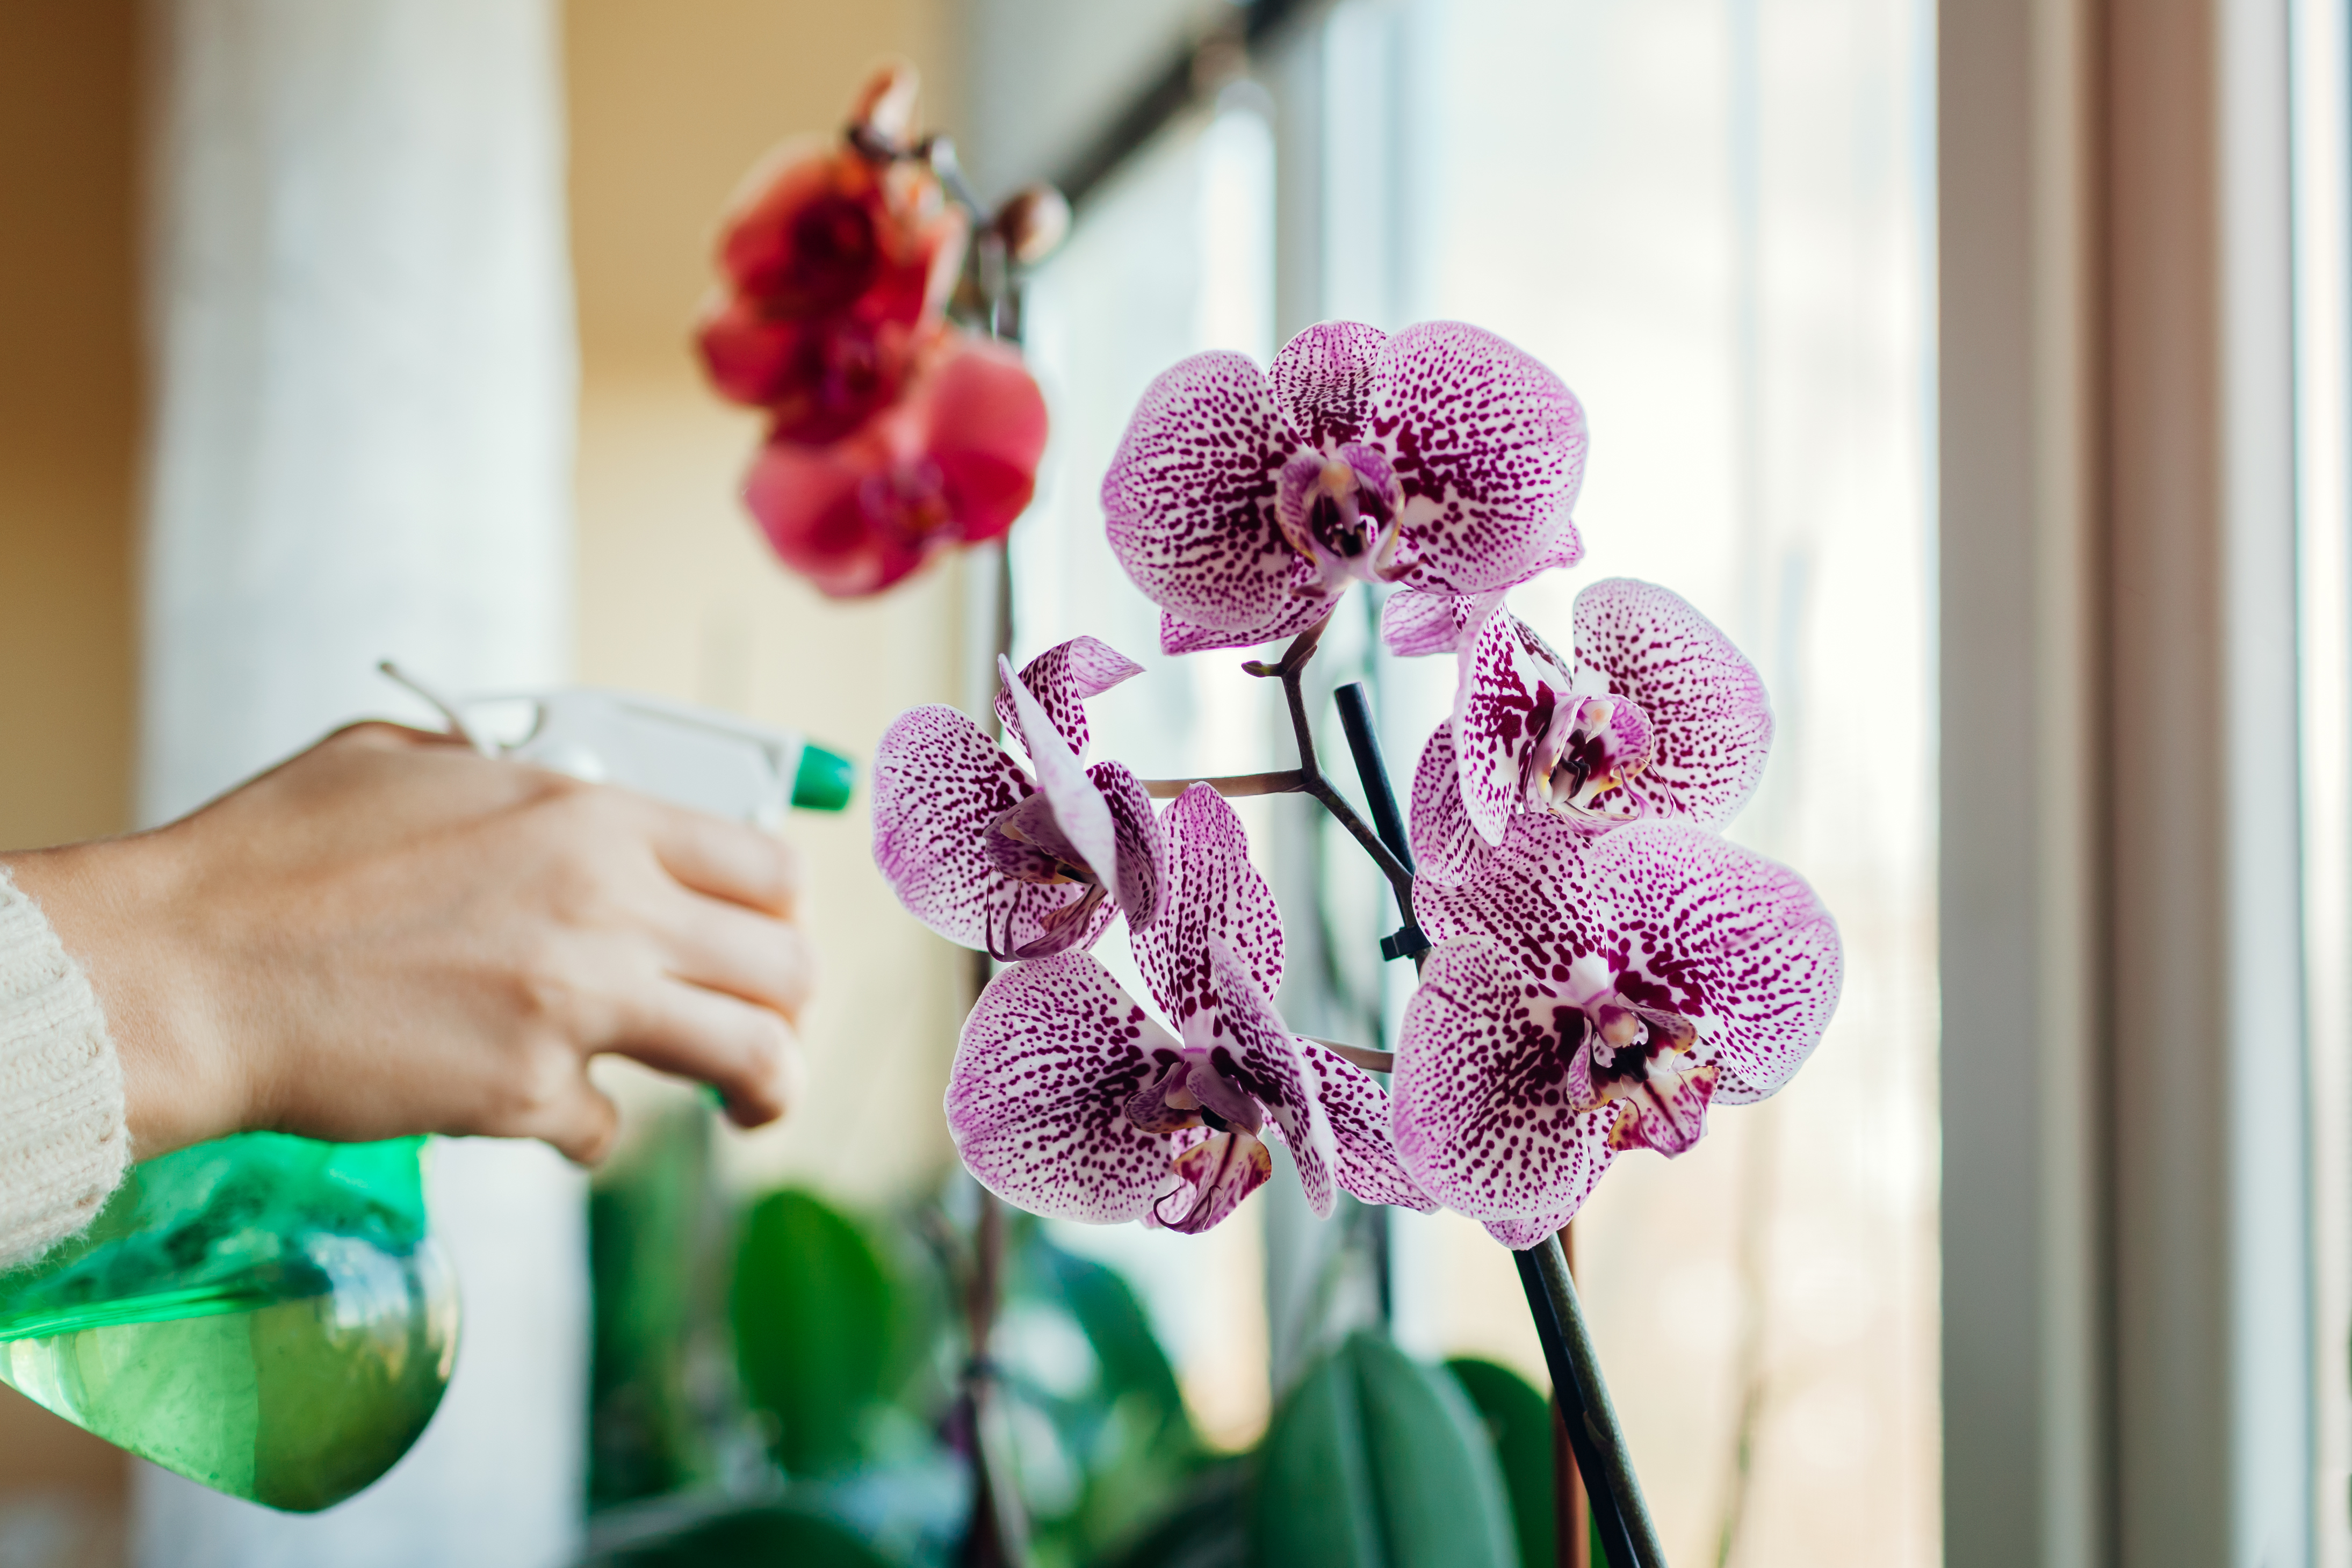 Woman spraying water on blooming orchid on window sill. Girl taking care of home plants and flowers | Source: Getty Images